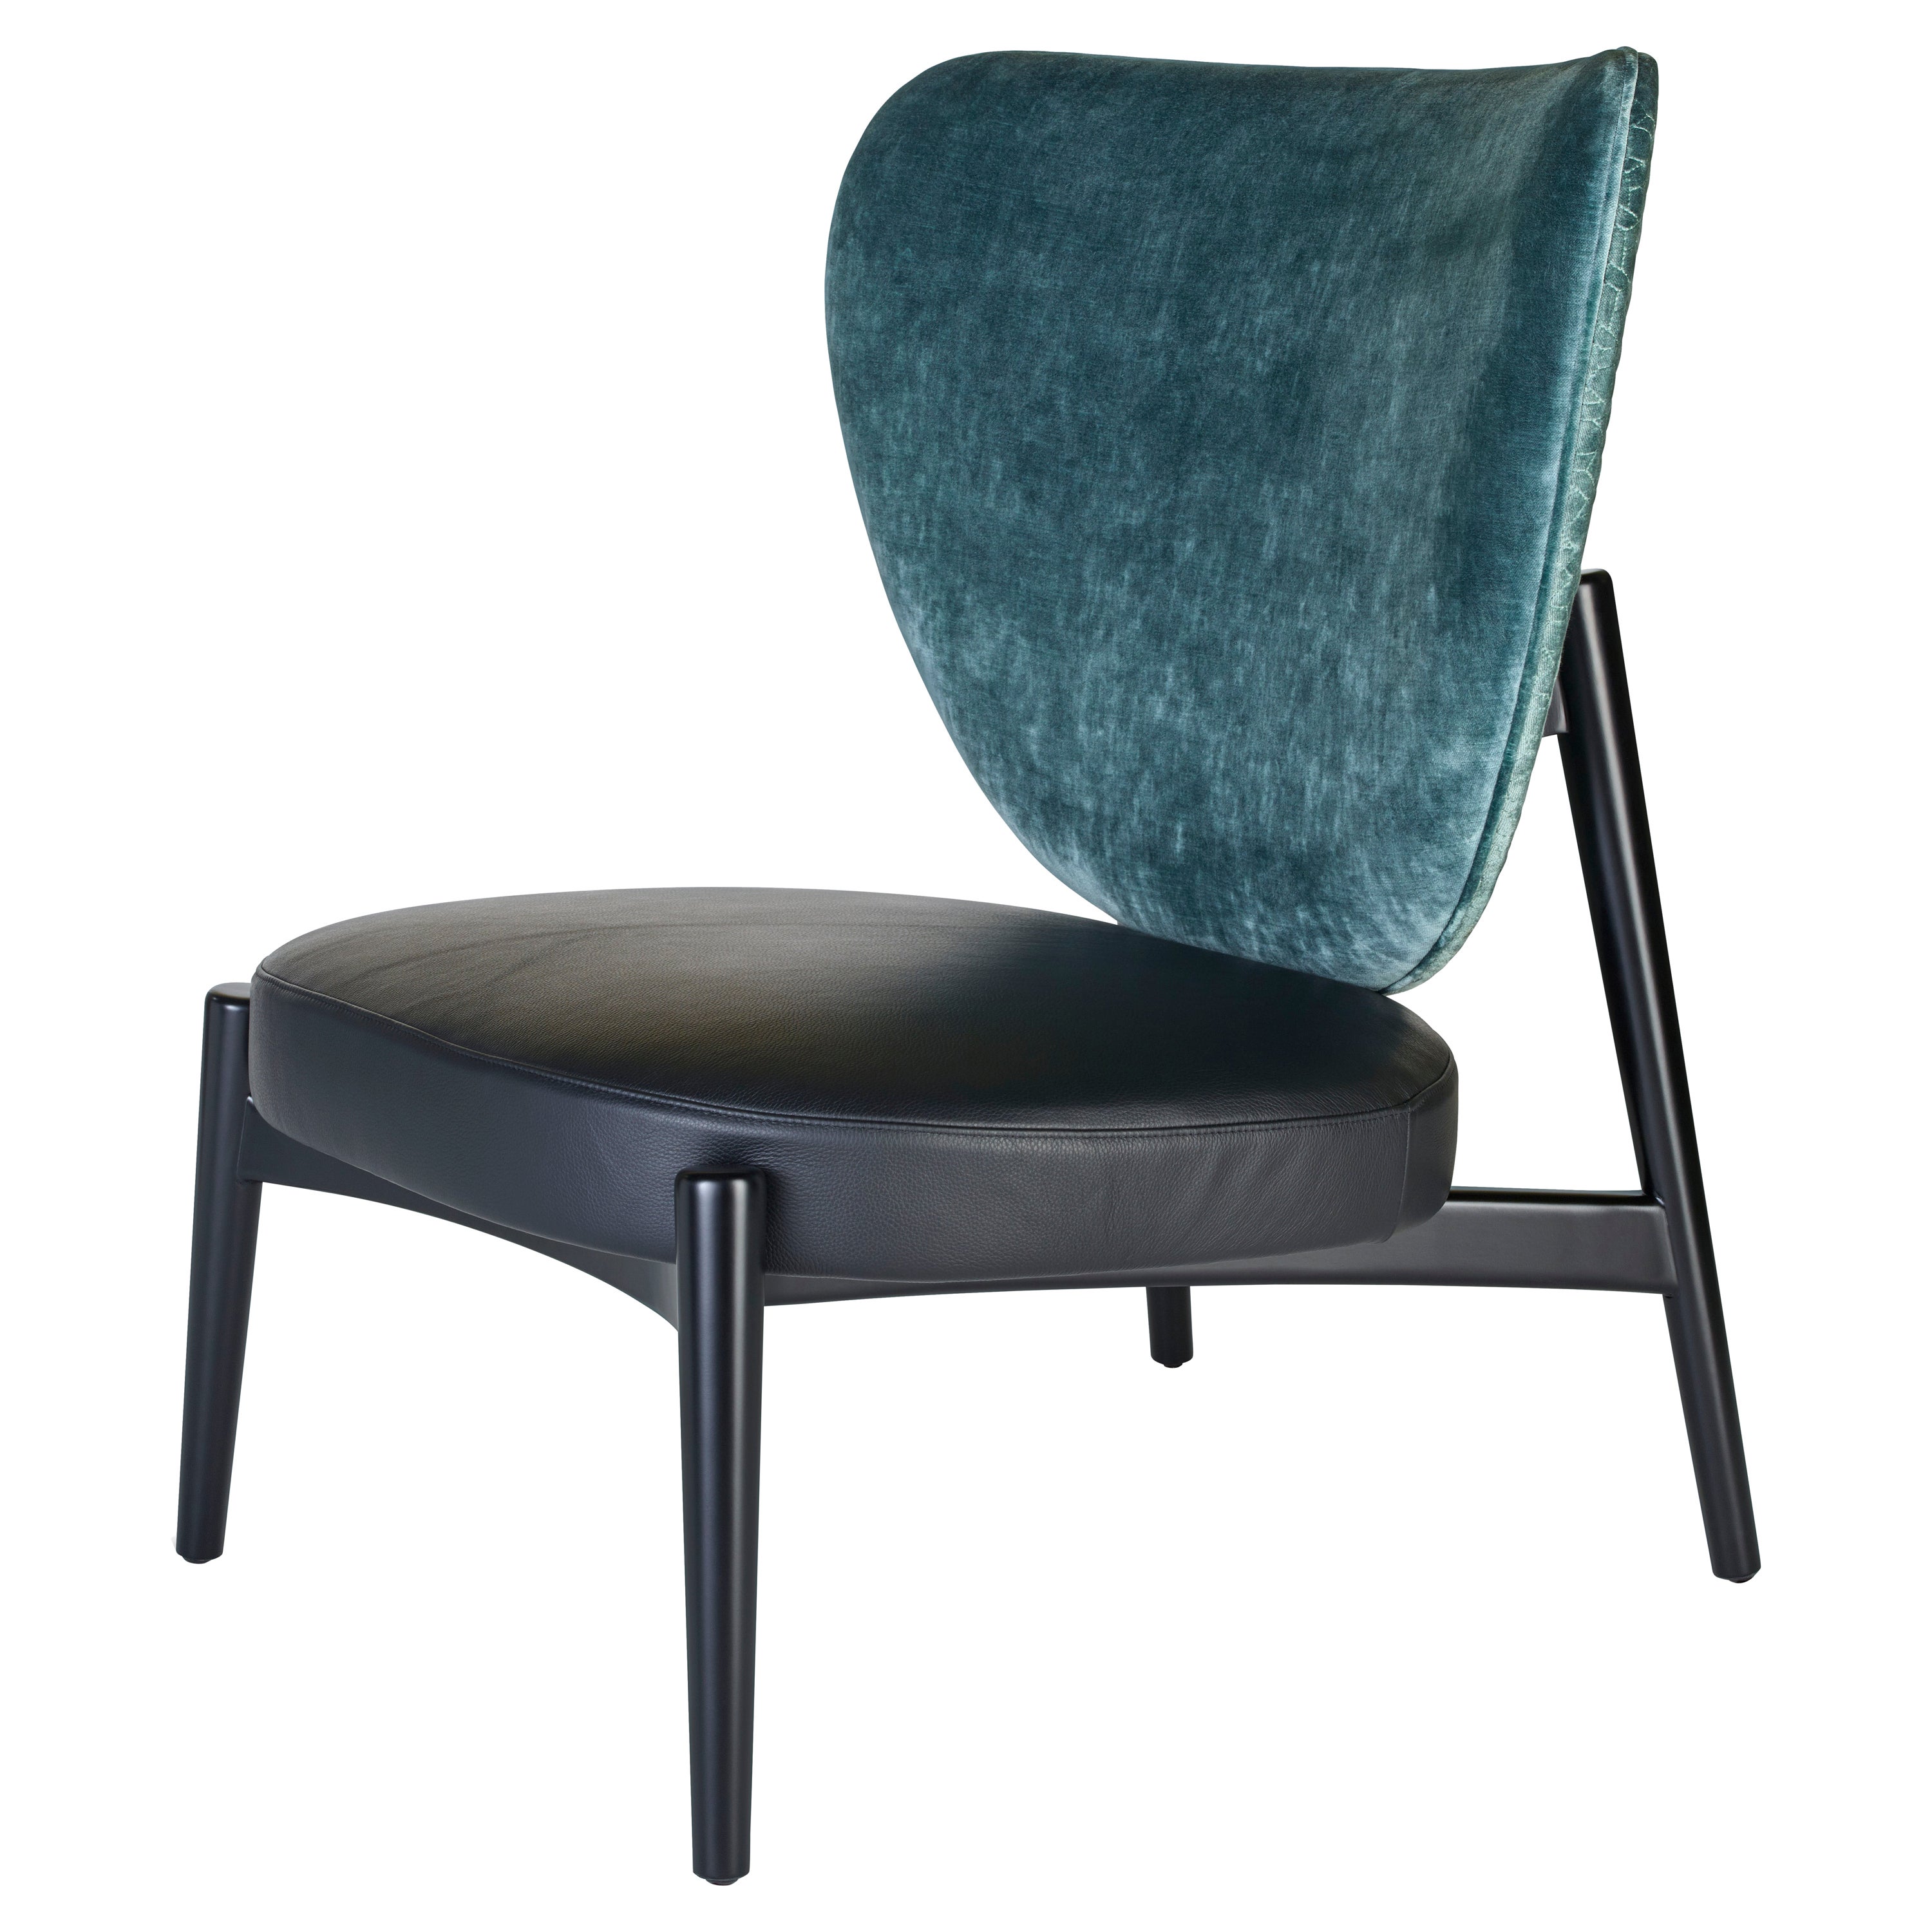 Armchair Frame in Wood Matt Moka Black Laquer or Ivory Laquer Fabric or Leather